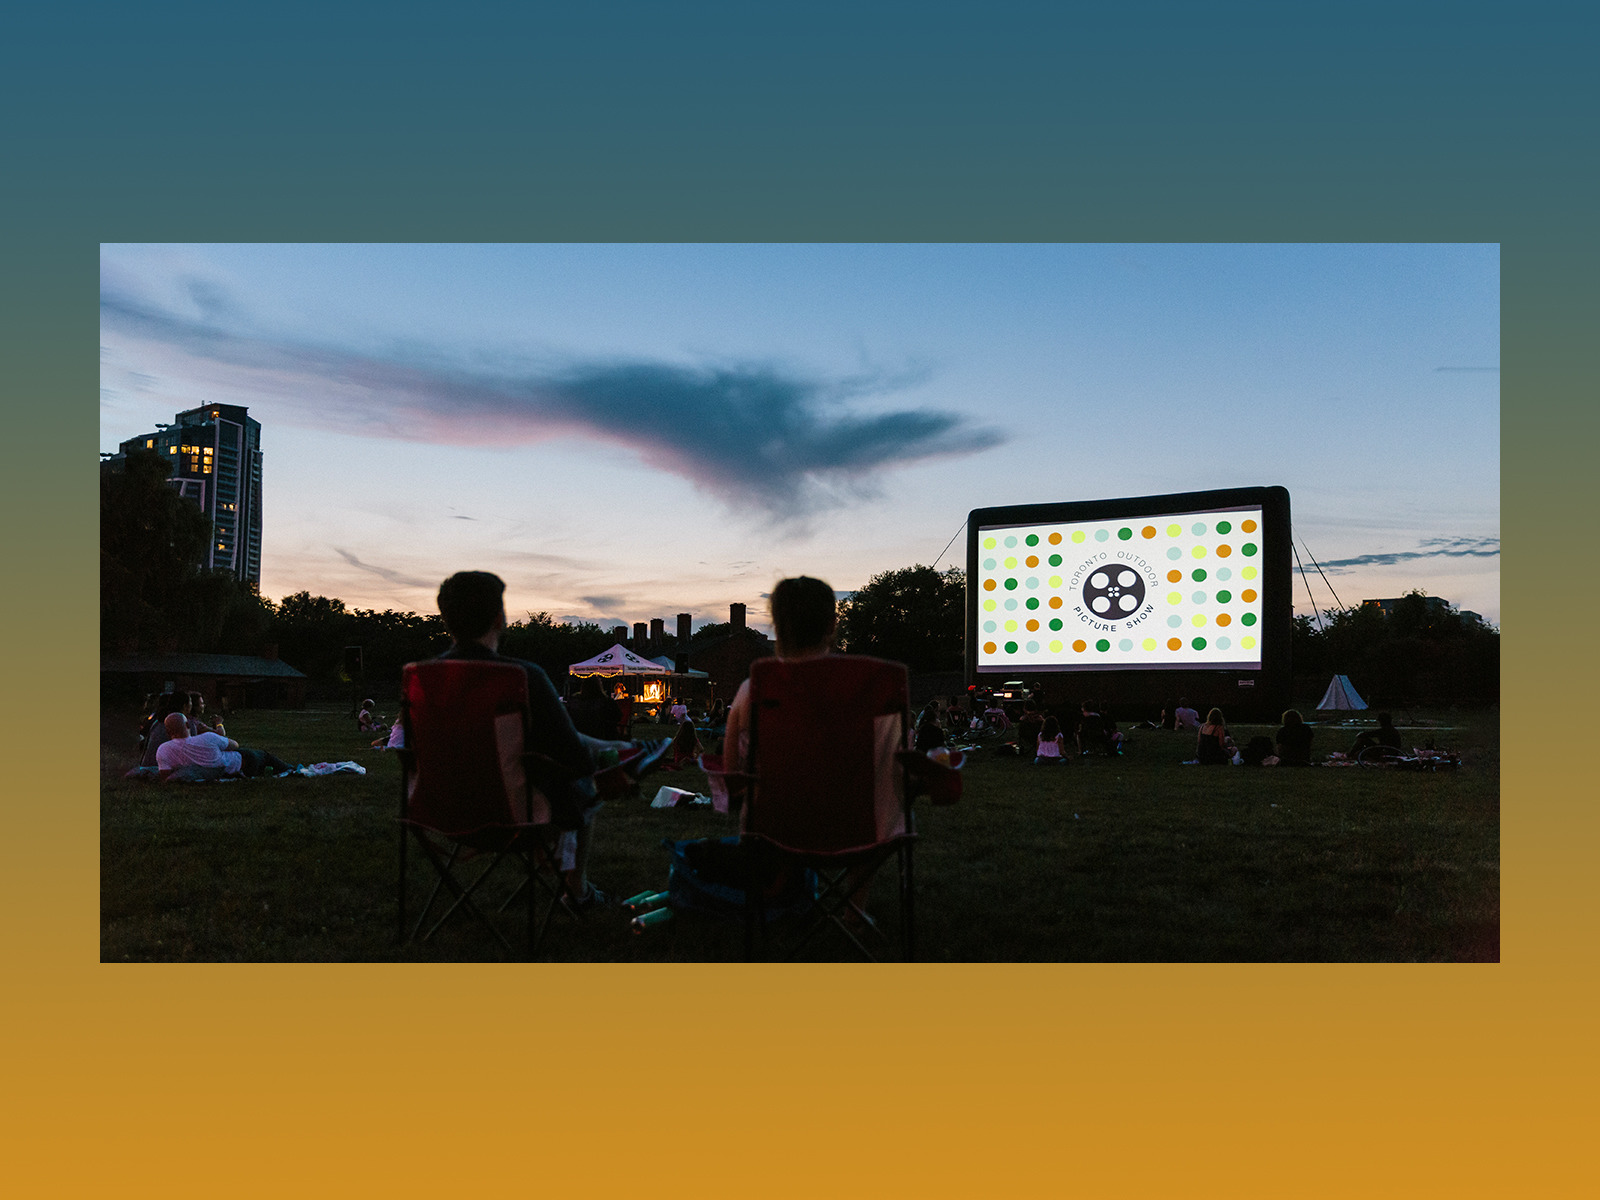 people watching a movie screen on the grass